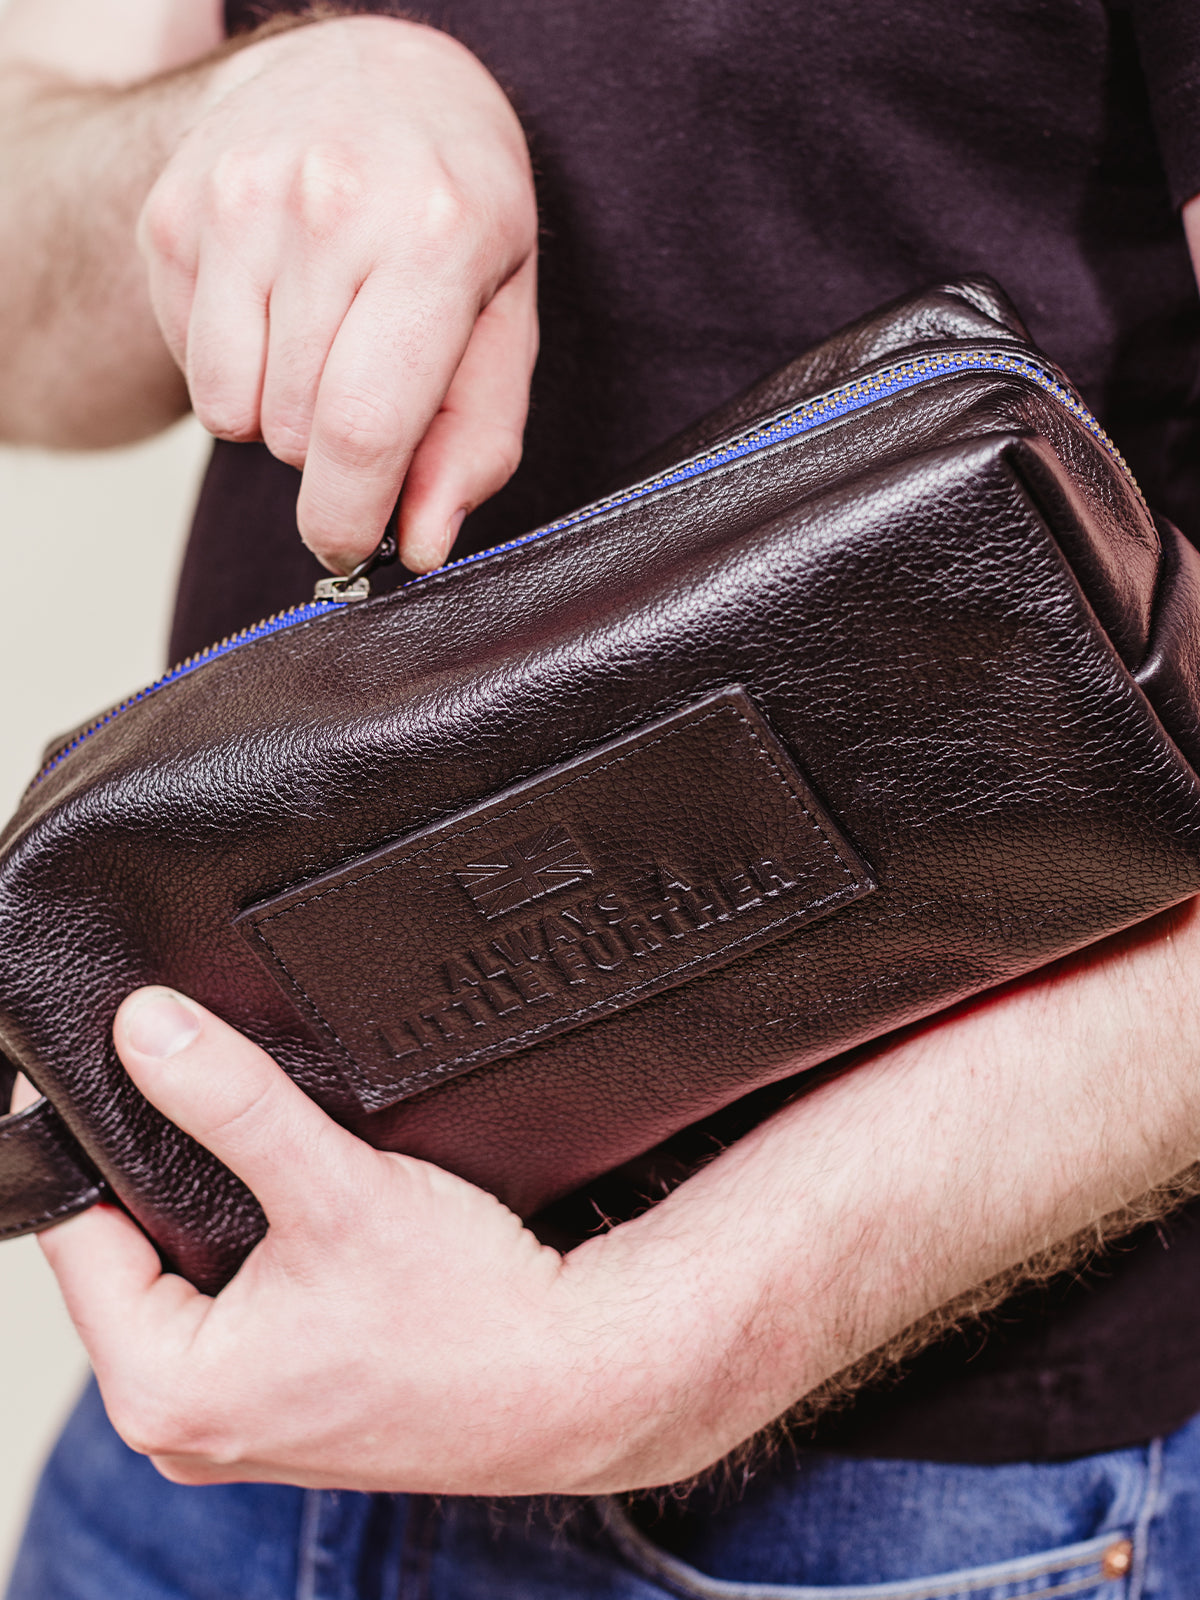 Male model unzipping black leather toiletry bag with blue accent zipper. 